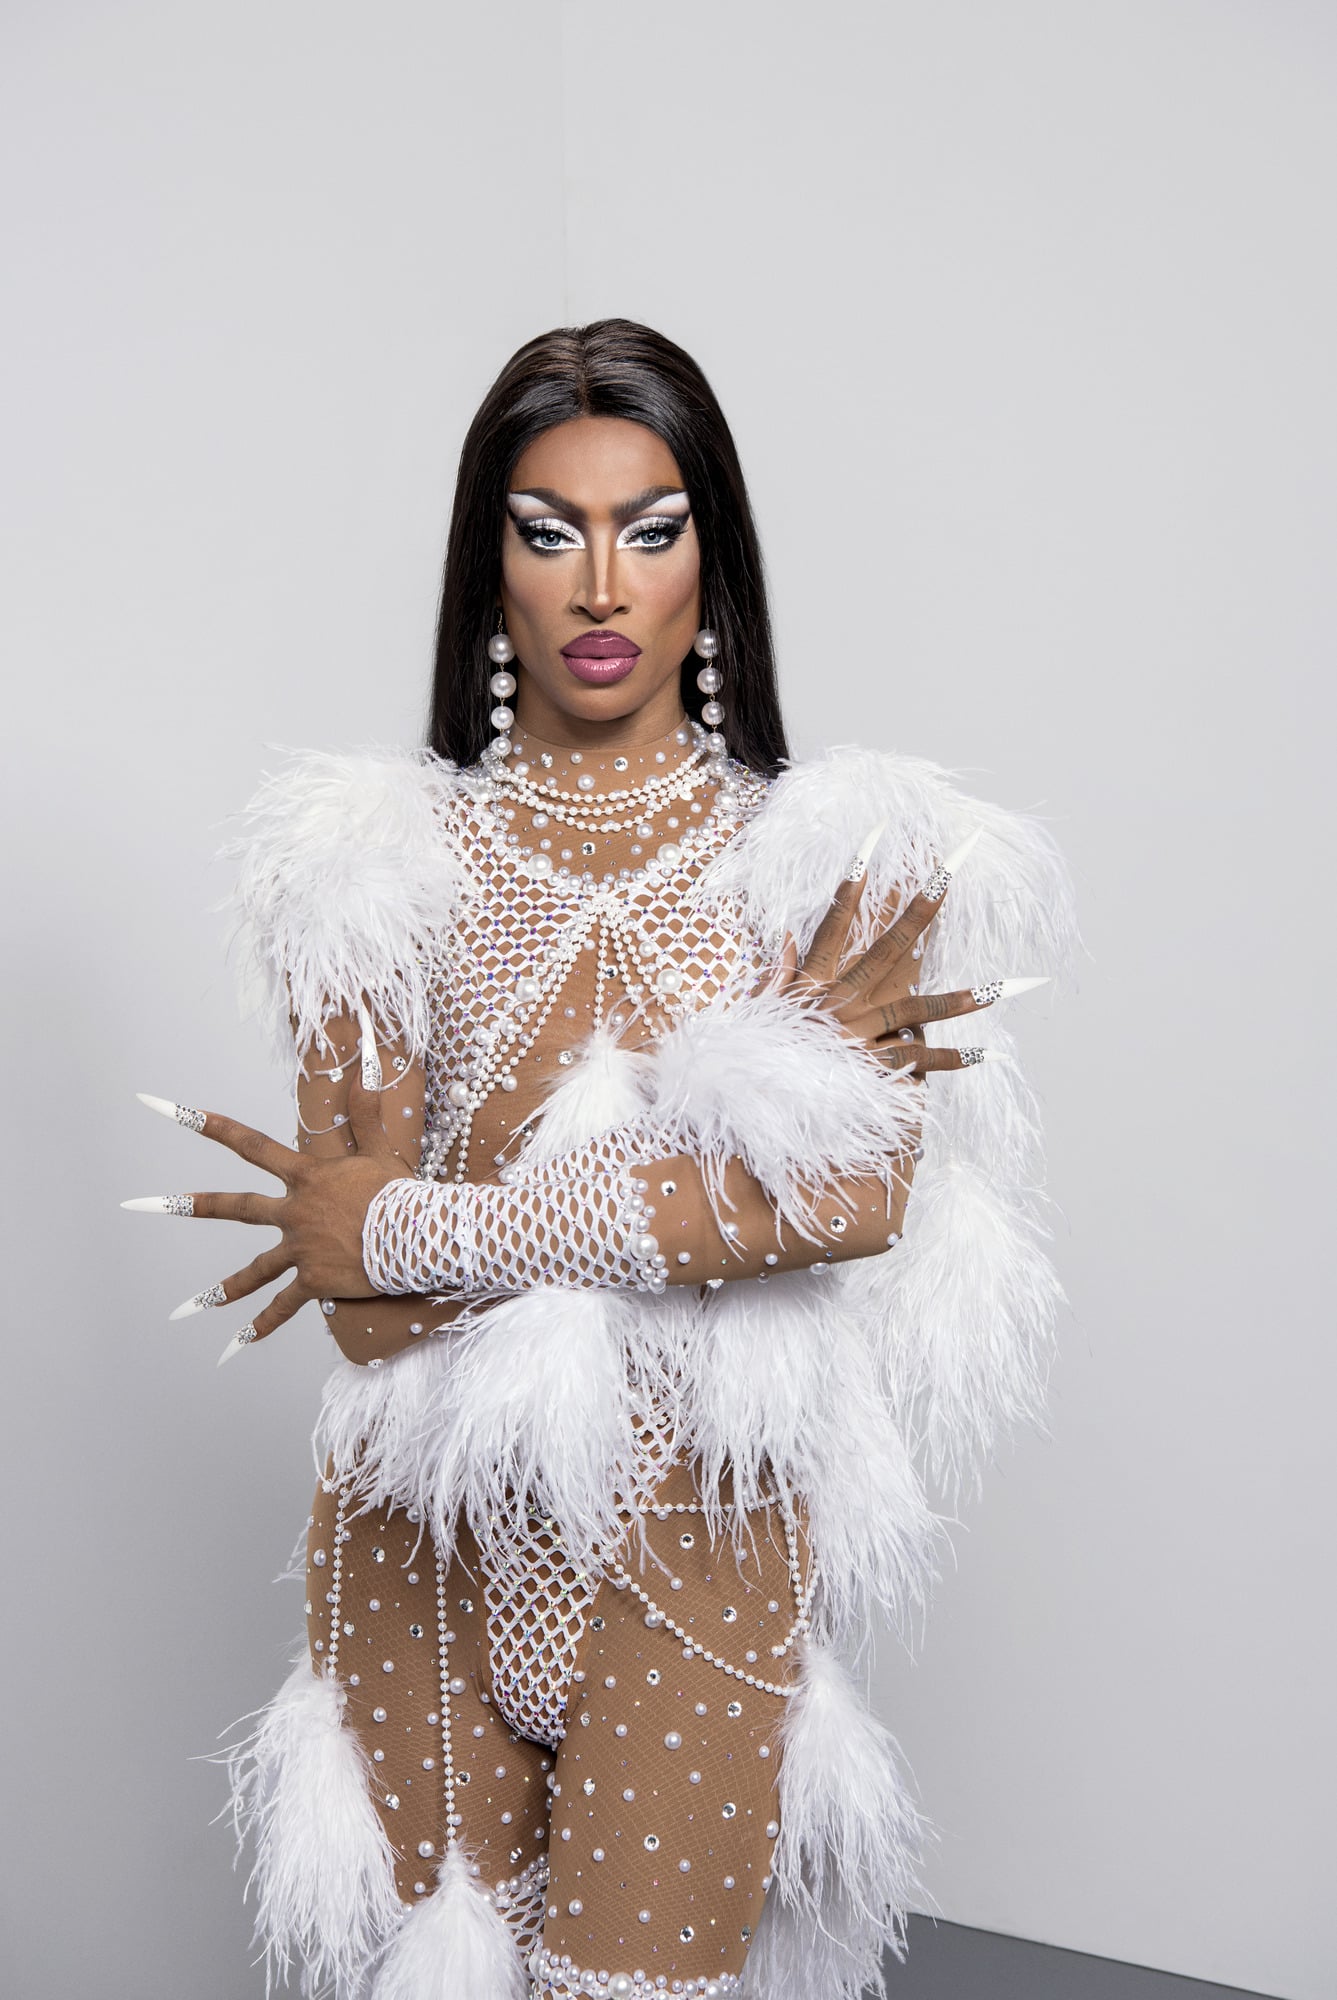 WARNING: Embargoed for publication until 09:00:00 on 16/12/2020 - Programme Name: RuPaul's Drag Race UK series 2 - TX: n/a - Episode: RuPaul's Drag Race UK series 2 generics (No. n/a) - Picture Shows:  Tayce - (C) World of Wonder - Photographer: Ray Burmiston